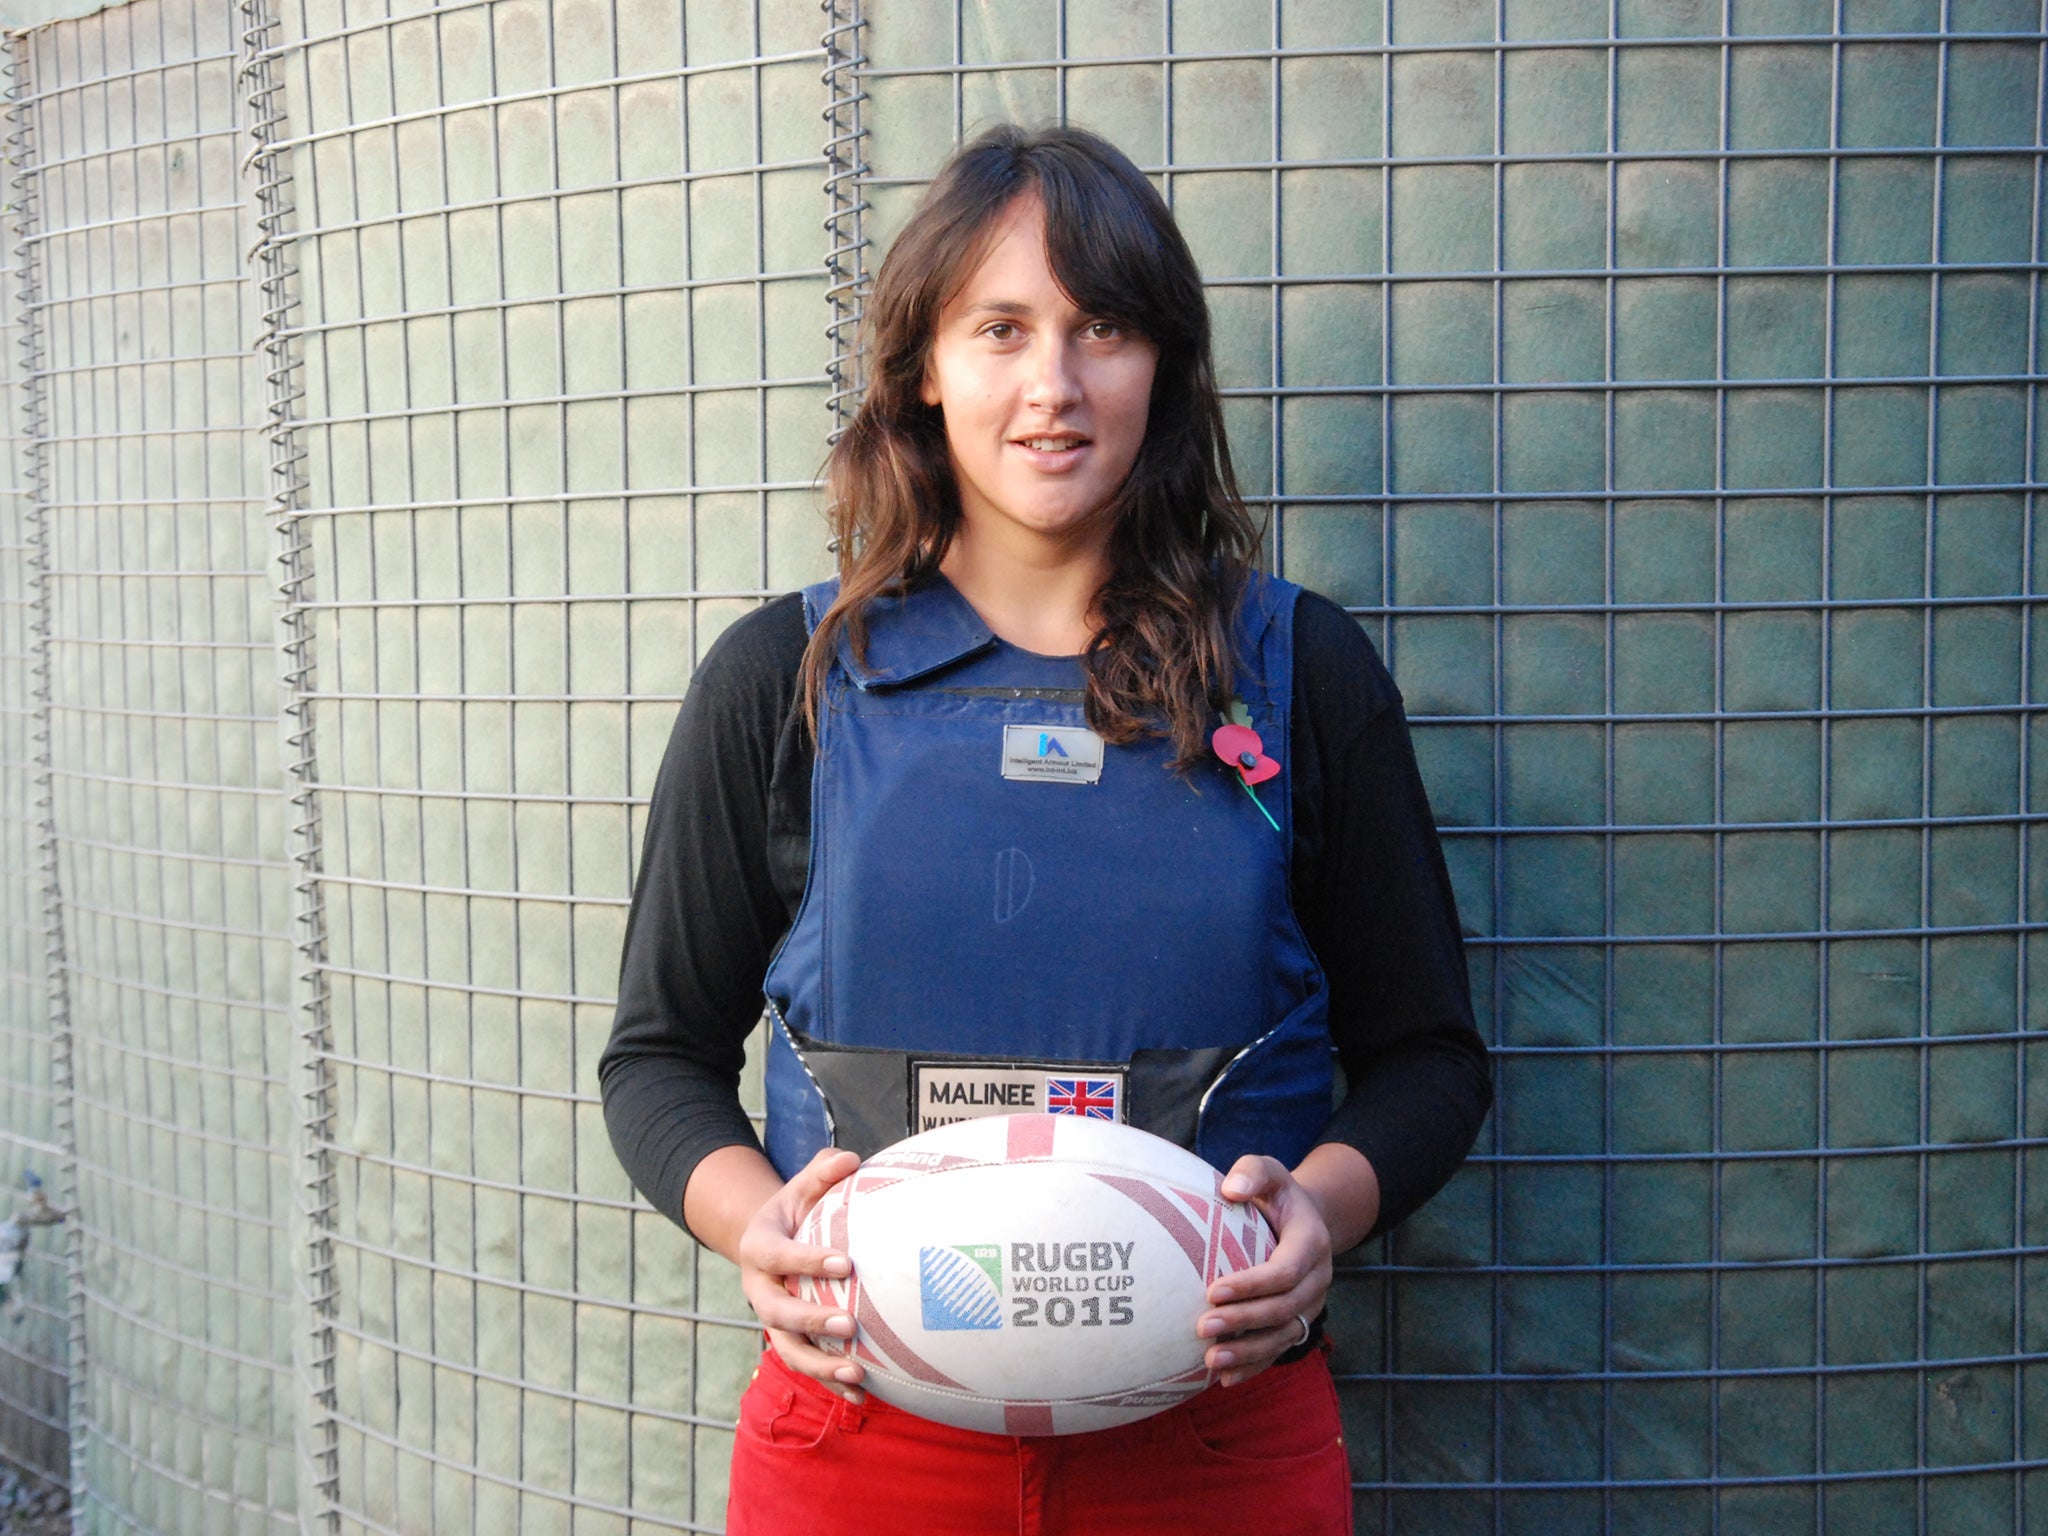 Malinee Wanduragala, a British volunteer worker, wants to see rugby spread to schools across the country